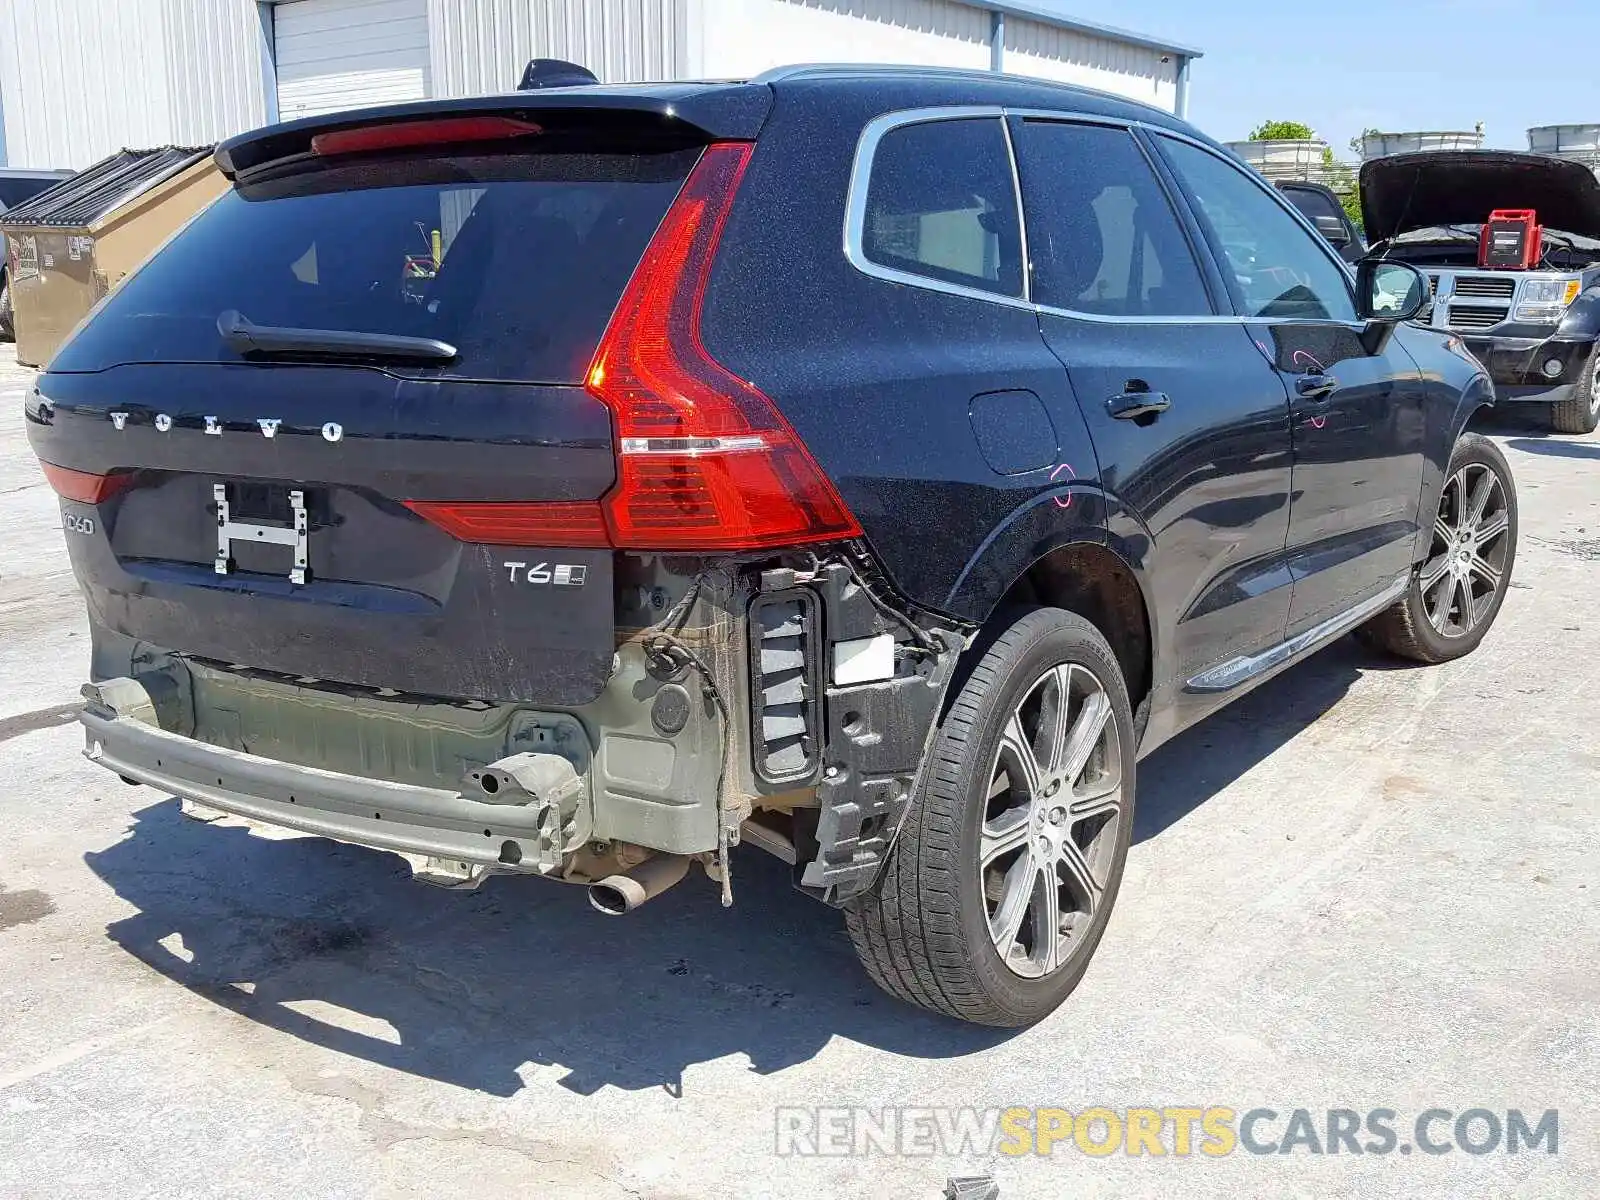 4 Photograph of a damaged car LYVA22RL8KB228891 VOLVO XC60 T6 IN 2019